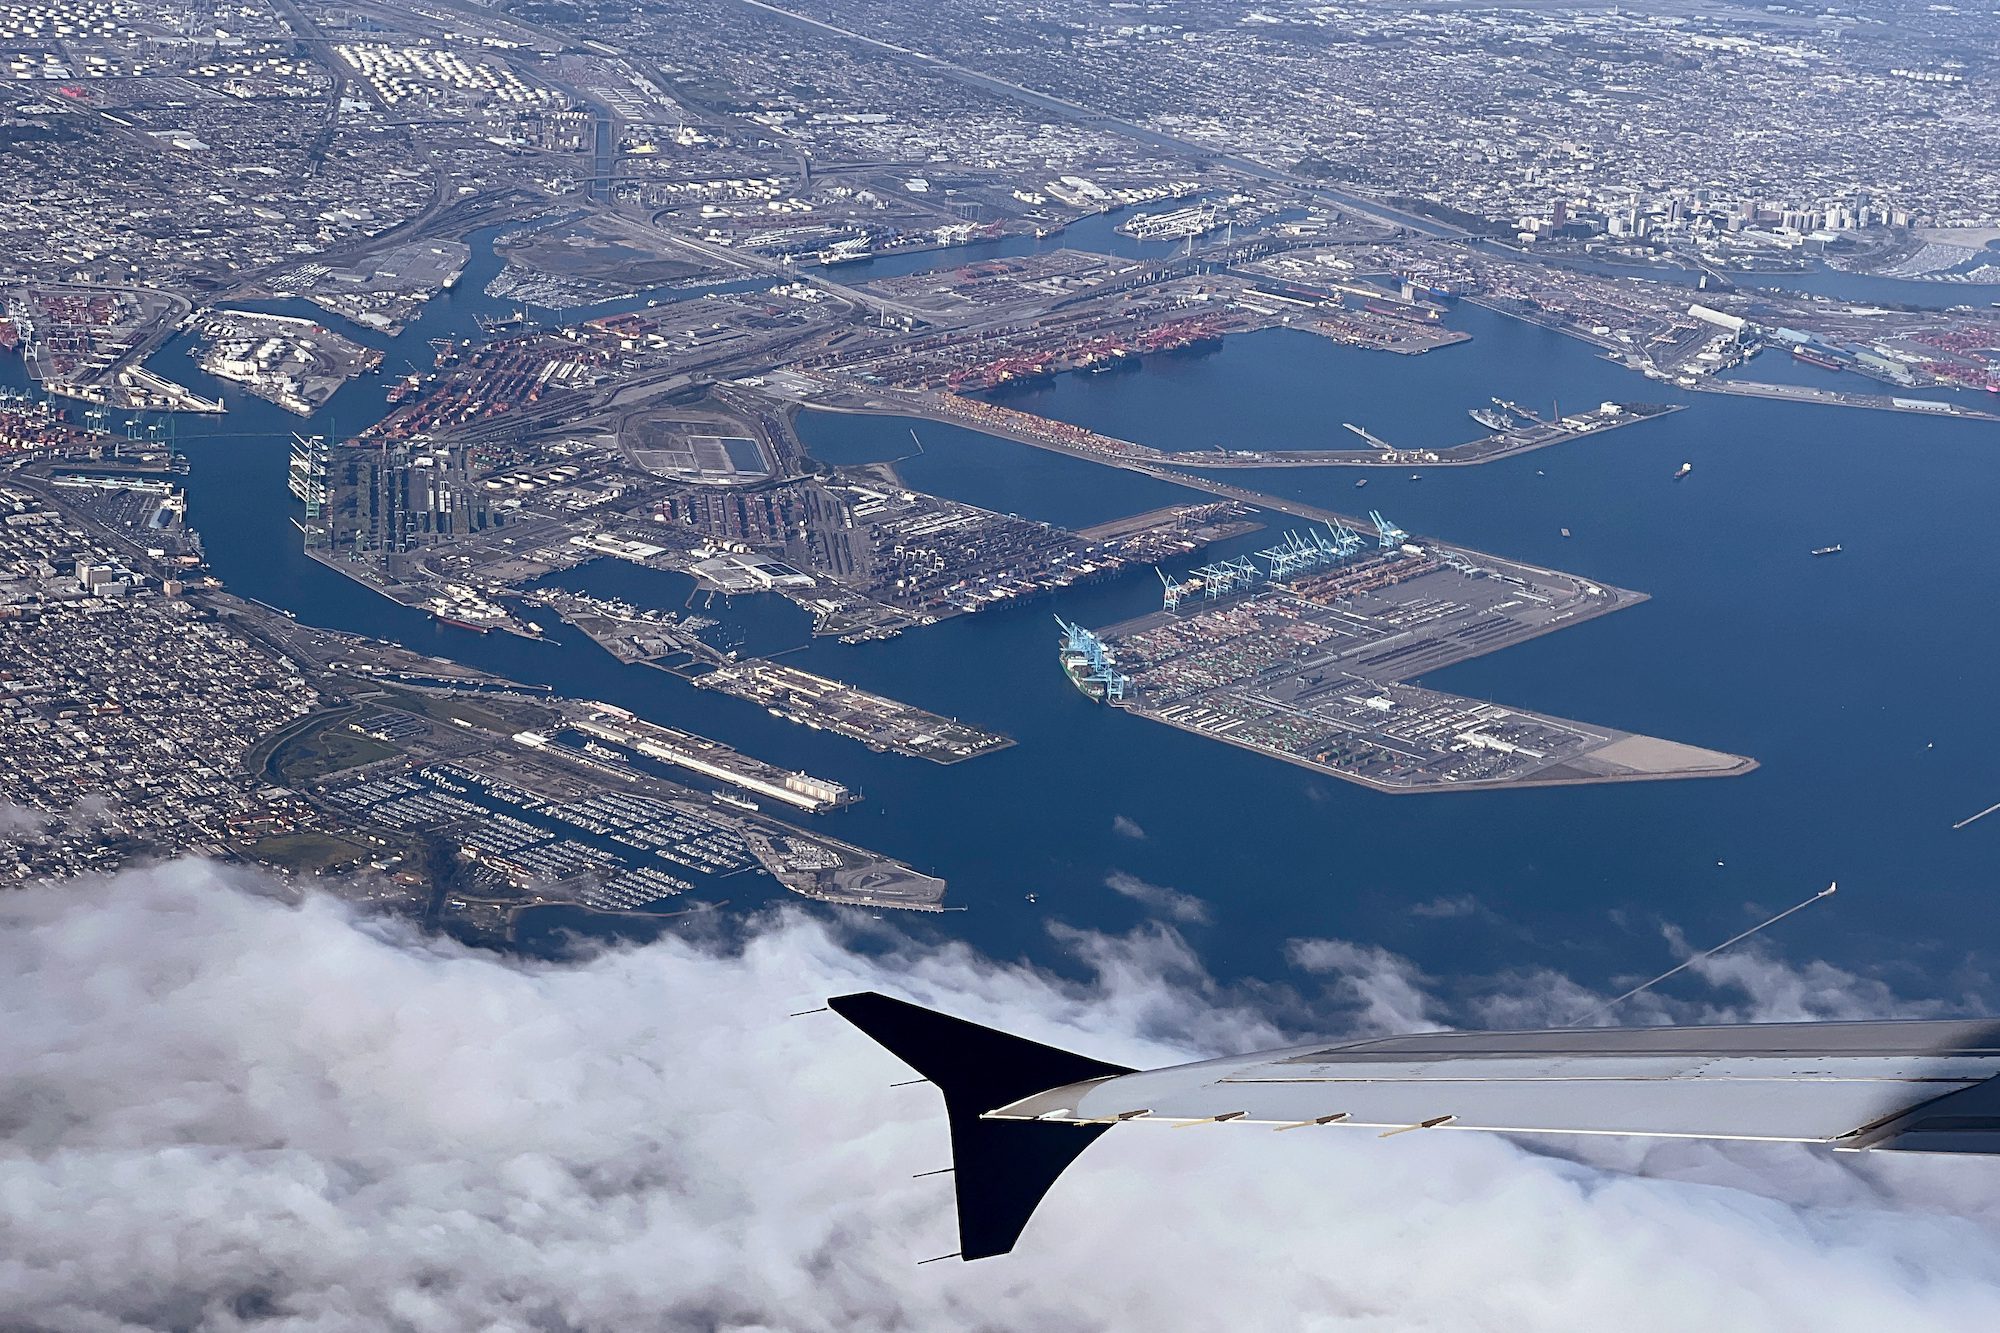 The shipping ports of Los Angeles (top left) and Long Beach are seen from the window of a commercial aircraft over Long Beach, California, U.S. March 13, 2023. REUTERS/Chris Helgren